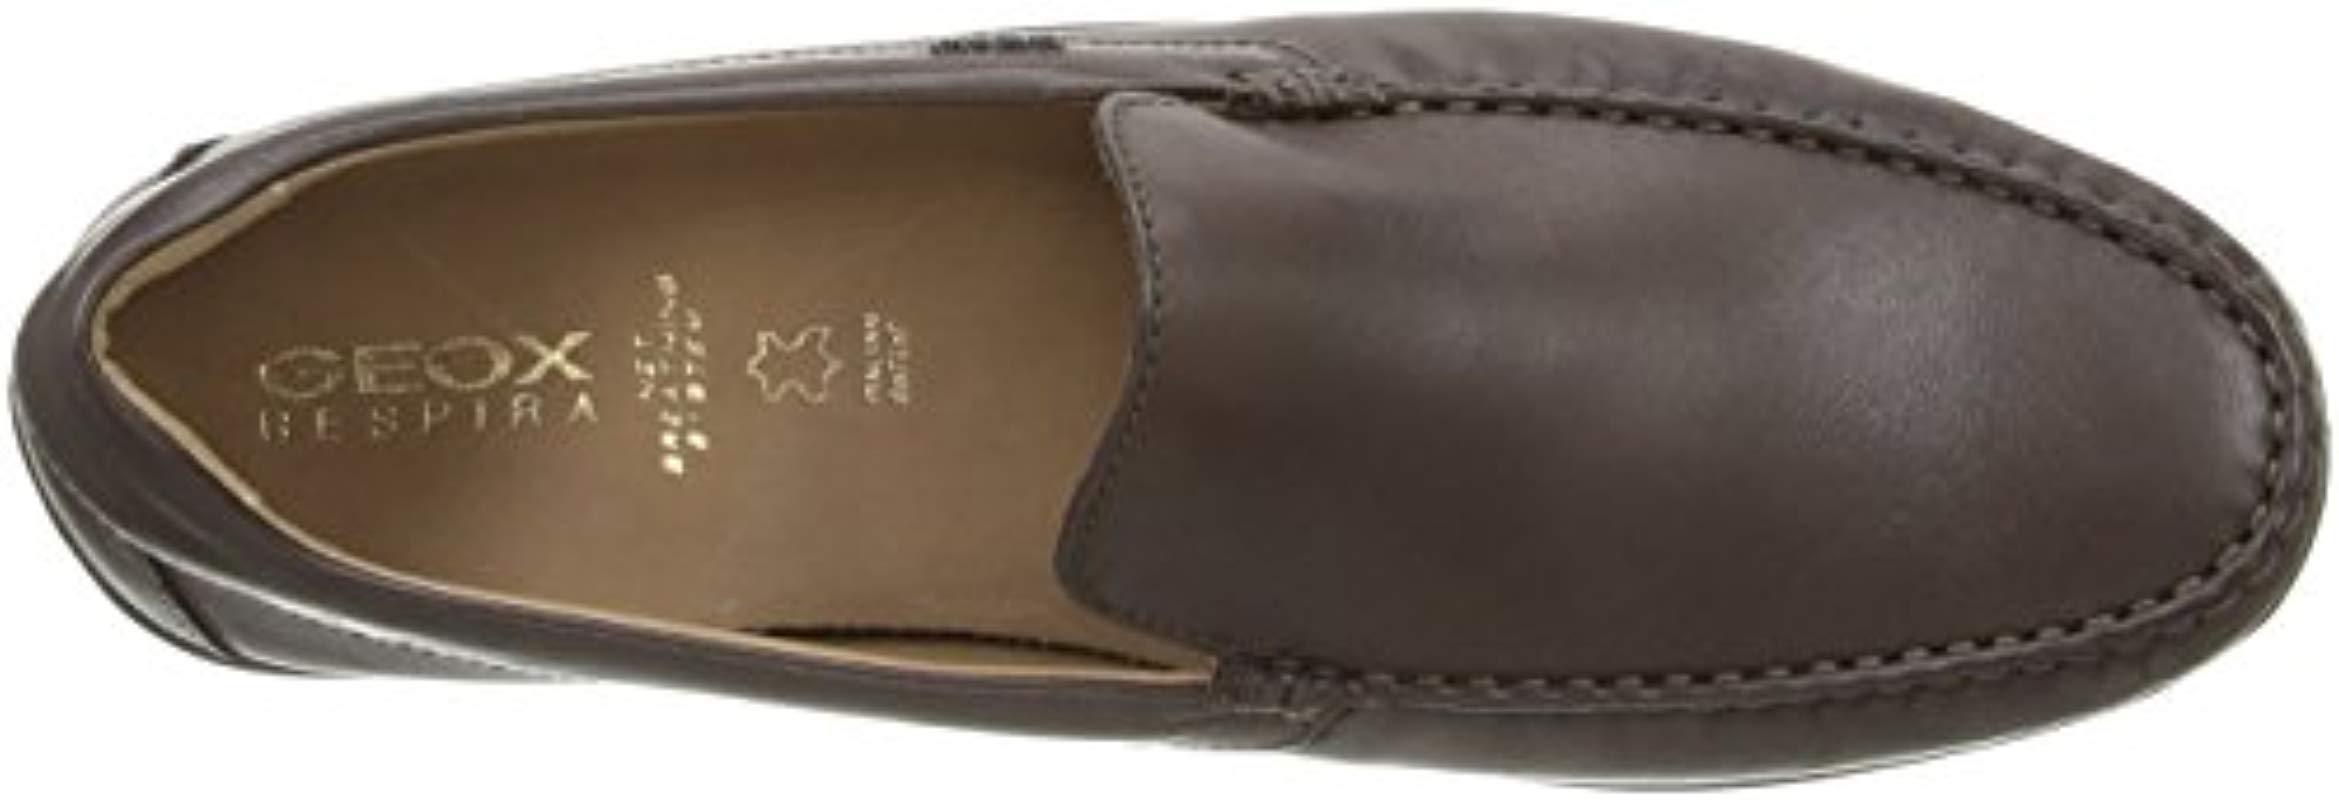 Geox U Xense Mox A Moccasins in Coffee (Brown) for Men - Lyst